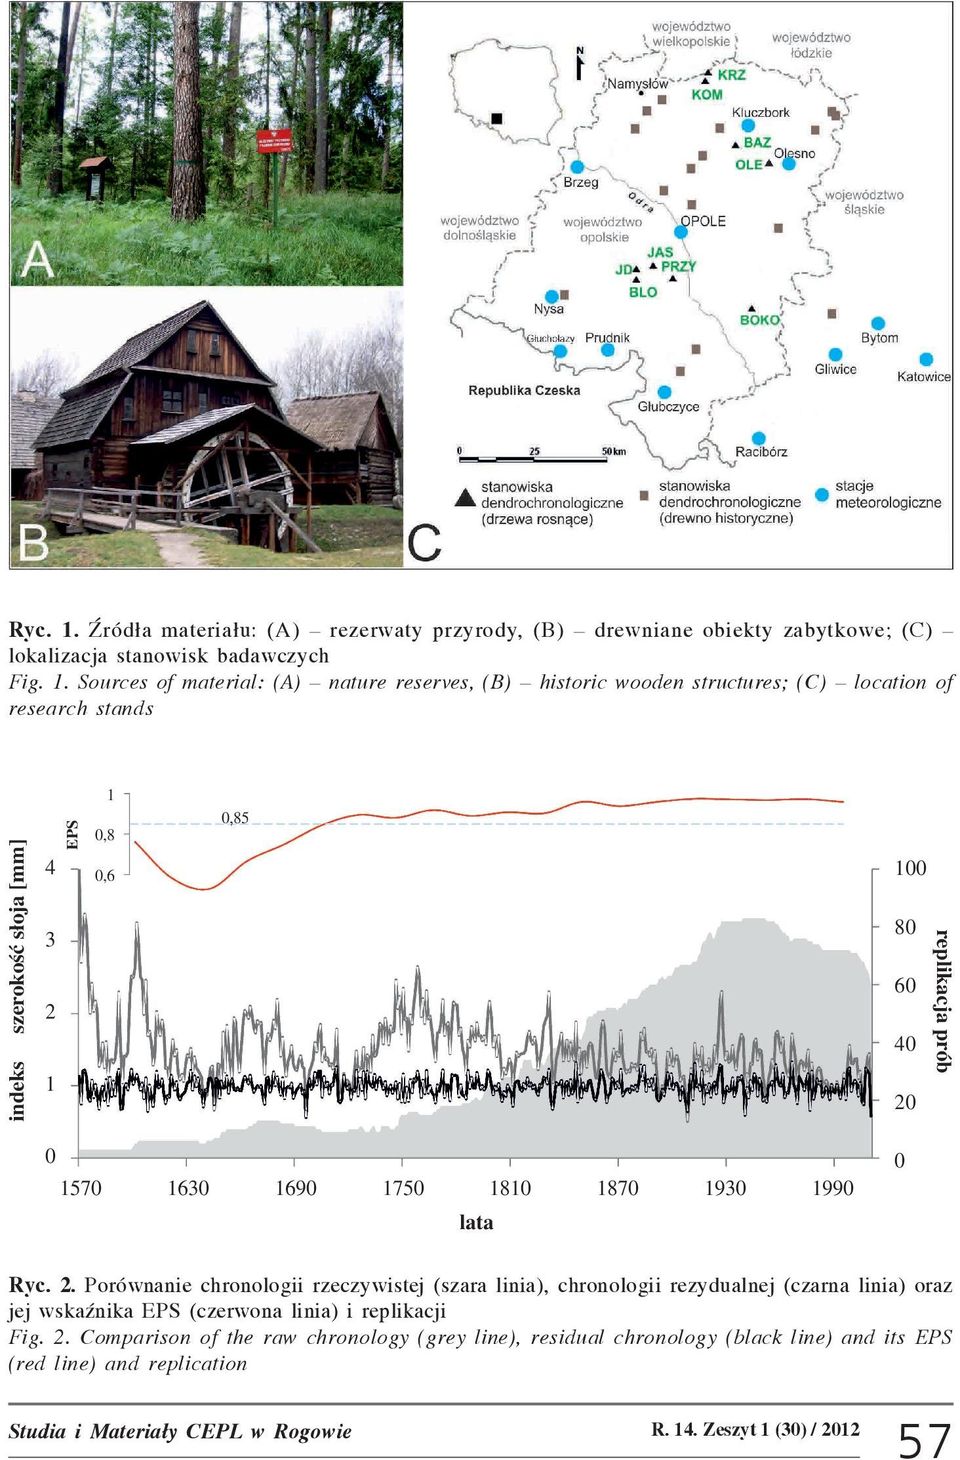 Sources of material: (A) nature reserves, (B) historic wooden structures; (C) location of research stands indeks szerokość słoja [mm] 4 3 2 1 EPS 1,8,6,85 1 8 6 4 2